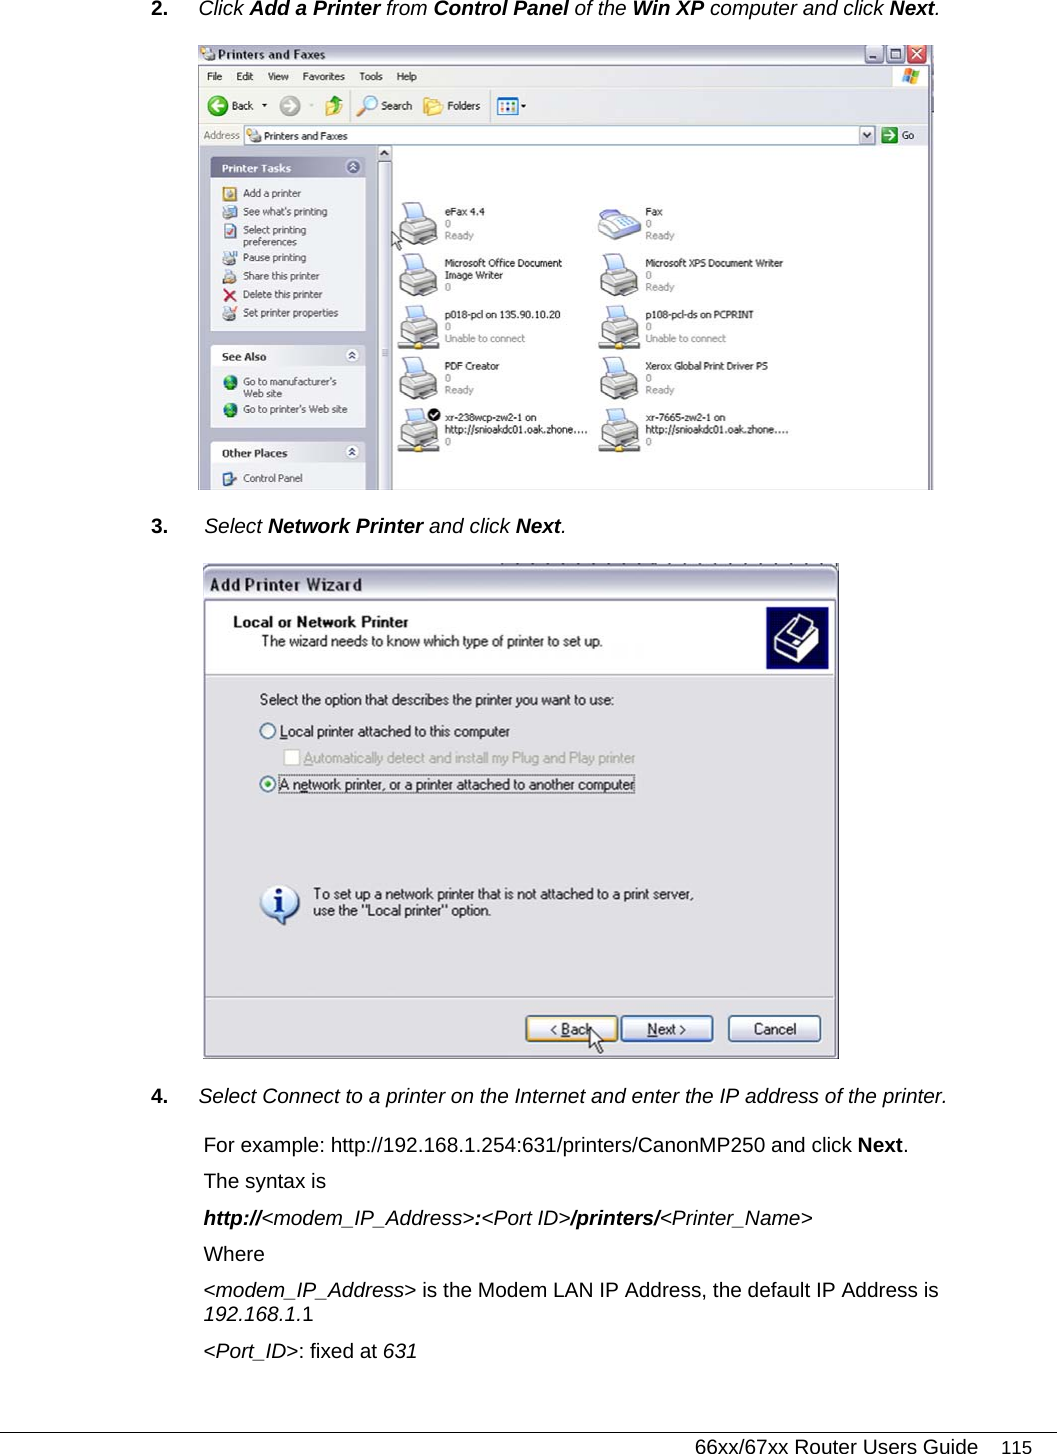   66xx/67xx Router Users Guide 115 2.  Click Add a Printer from Control Panel of the Win XP computer and click Next.  3.   Select Network Printer and click Next.  4.  Select Connect to a printer on the Internet and enter the IP address of the printer.  For example: http://192.168.1.254:631/printers/CanonMP250 and click Next.  The syntax is http://&lt;modem_IP_Address&gt;:&lt;Port ID&gt;/printers/&lt;Printer_Name&gt; Where &lt;modem_IP_Address&gt; is the Modem LAN IP Address, the default IP Address is 192.168.1.1 &lt;Port_ID&gt;: fixed at 631 